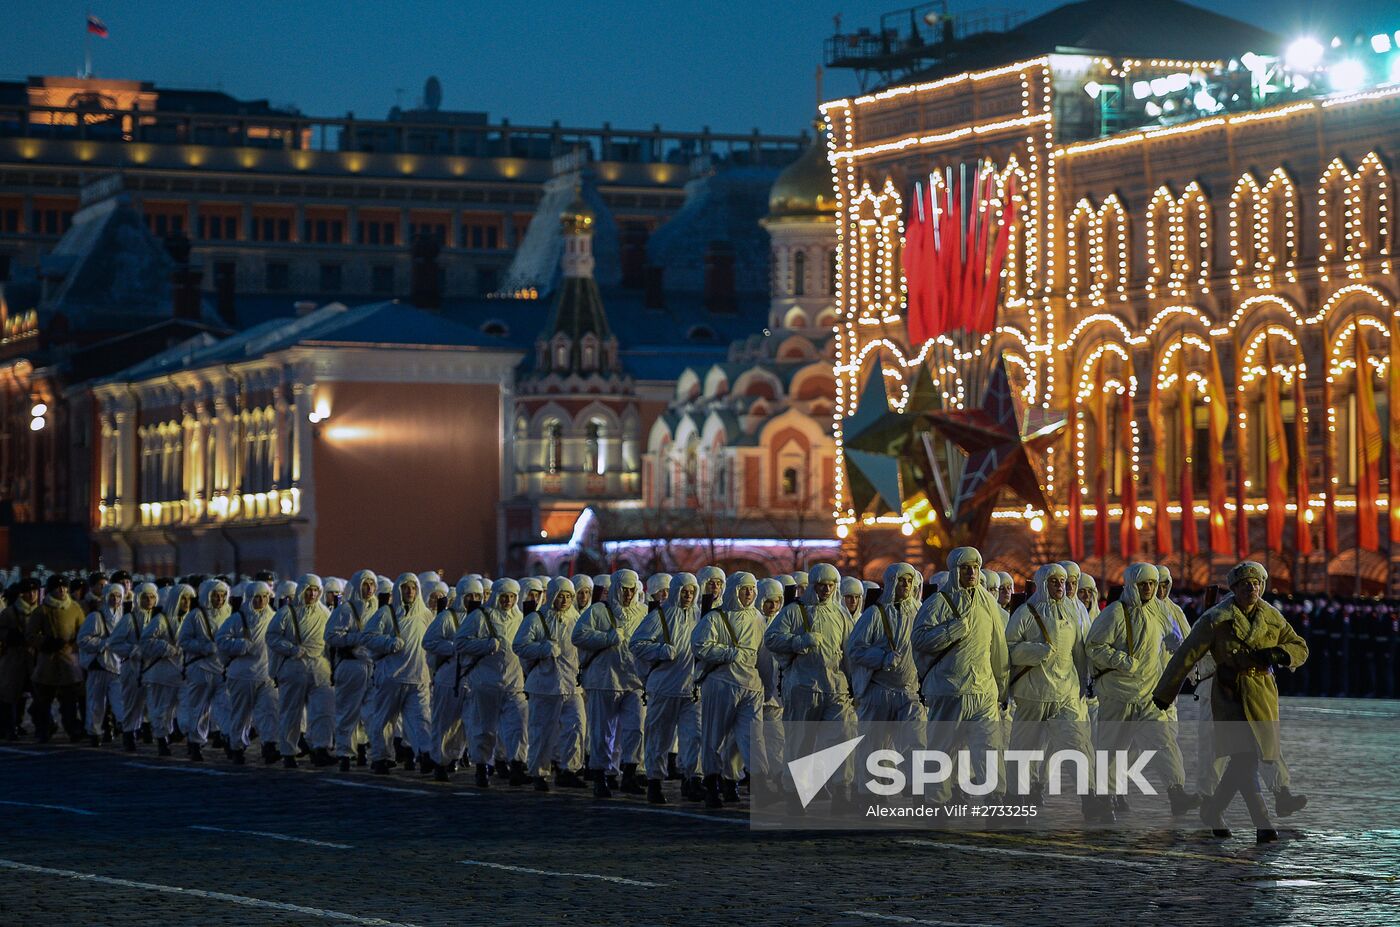 Rehearsal of march to mark legendary 1941 military parade